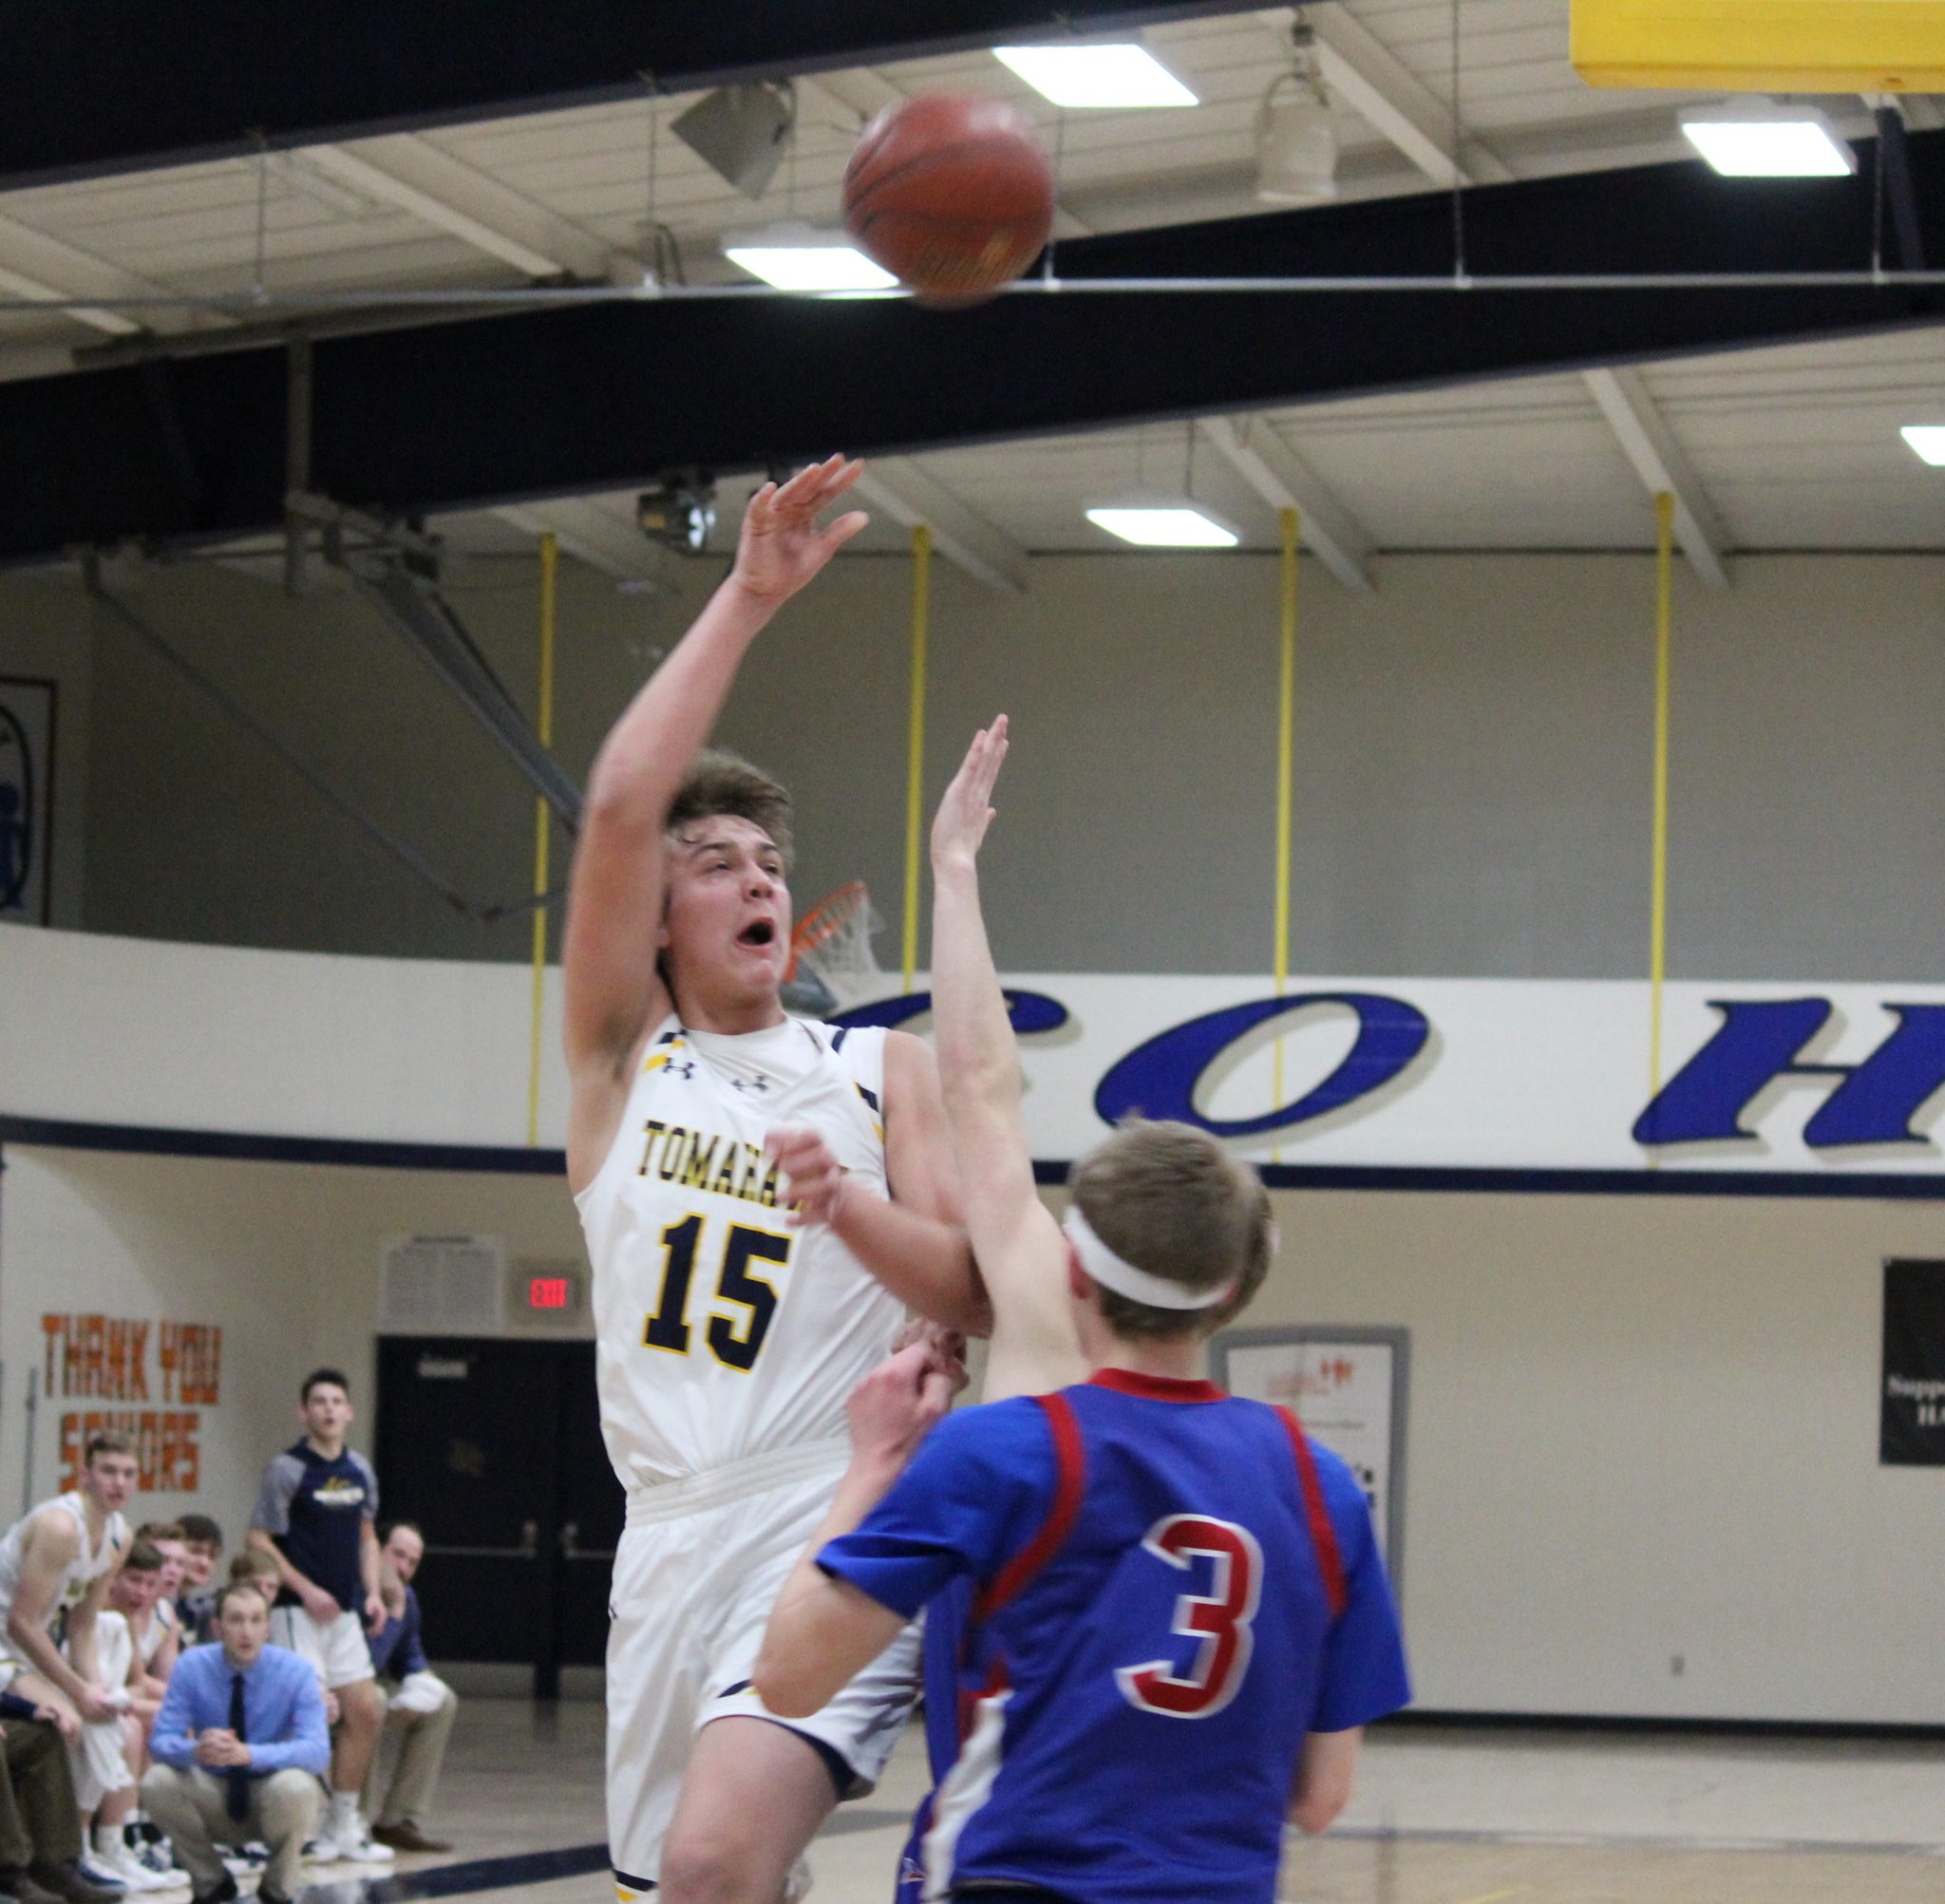 Eagles soar to playoff victory bringing Hatchet hoopster season to end